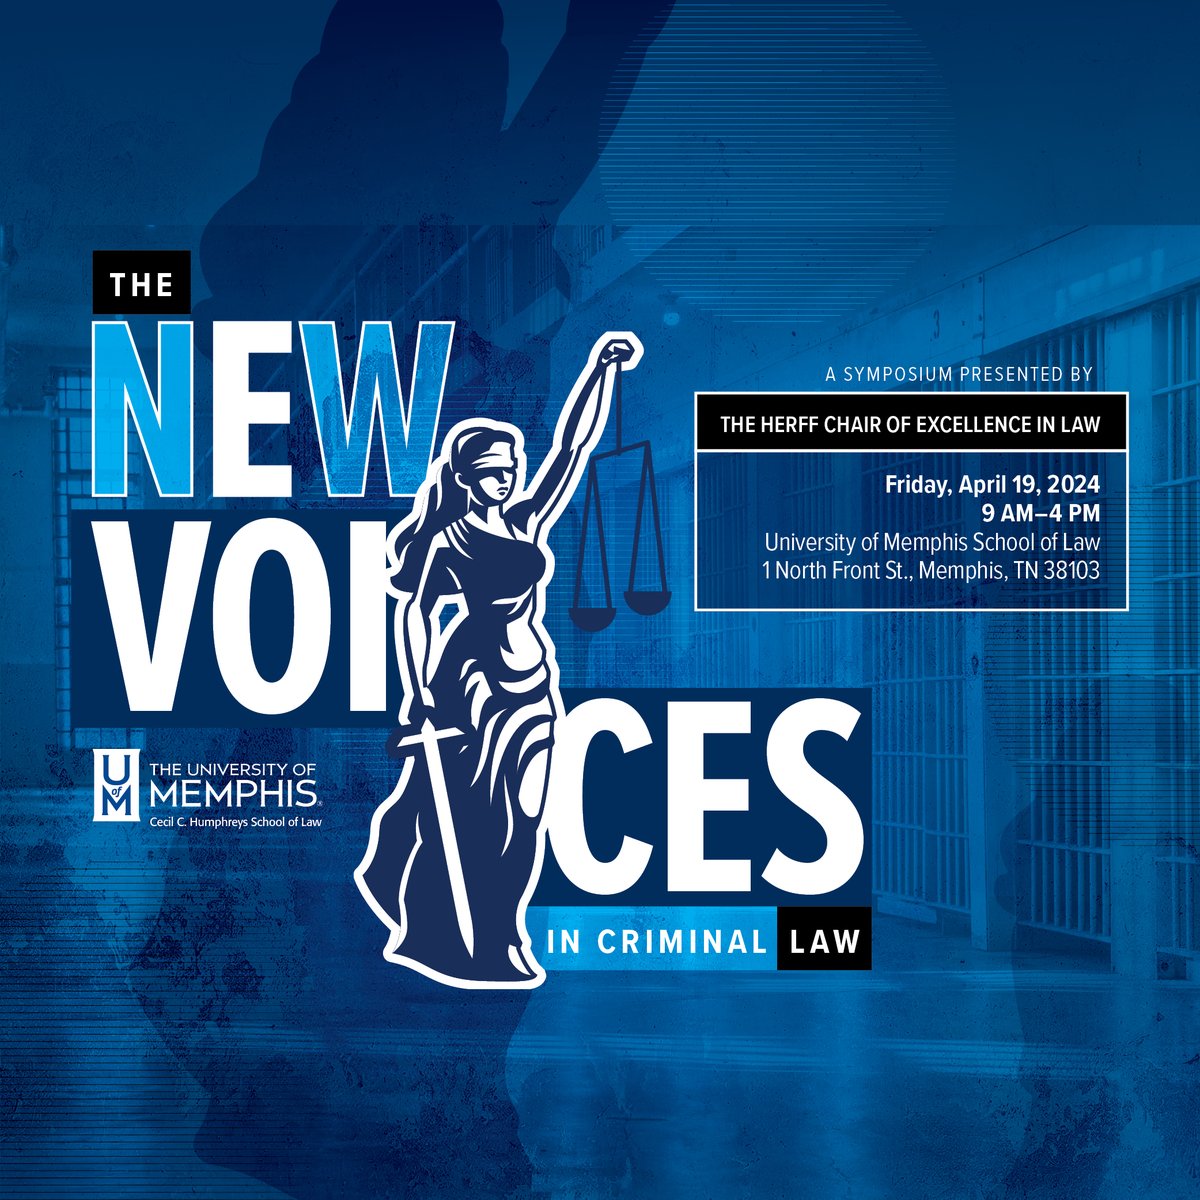 One final reminder that TOMORROW, Friday, April 19th, is this year's Herff Chair of Excellence Symposium, 'The New Voices in Criminal Law,' which will be focused on cutting-edge research regarding criminal law and the criminal legal system.